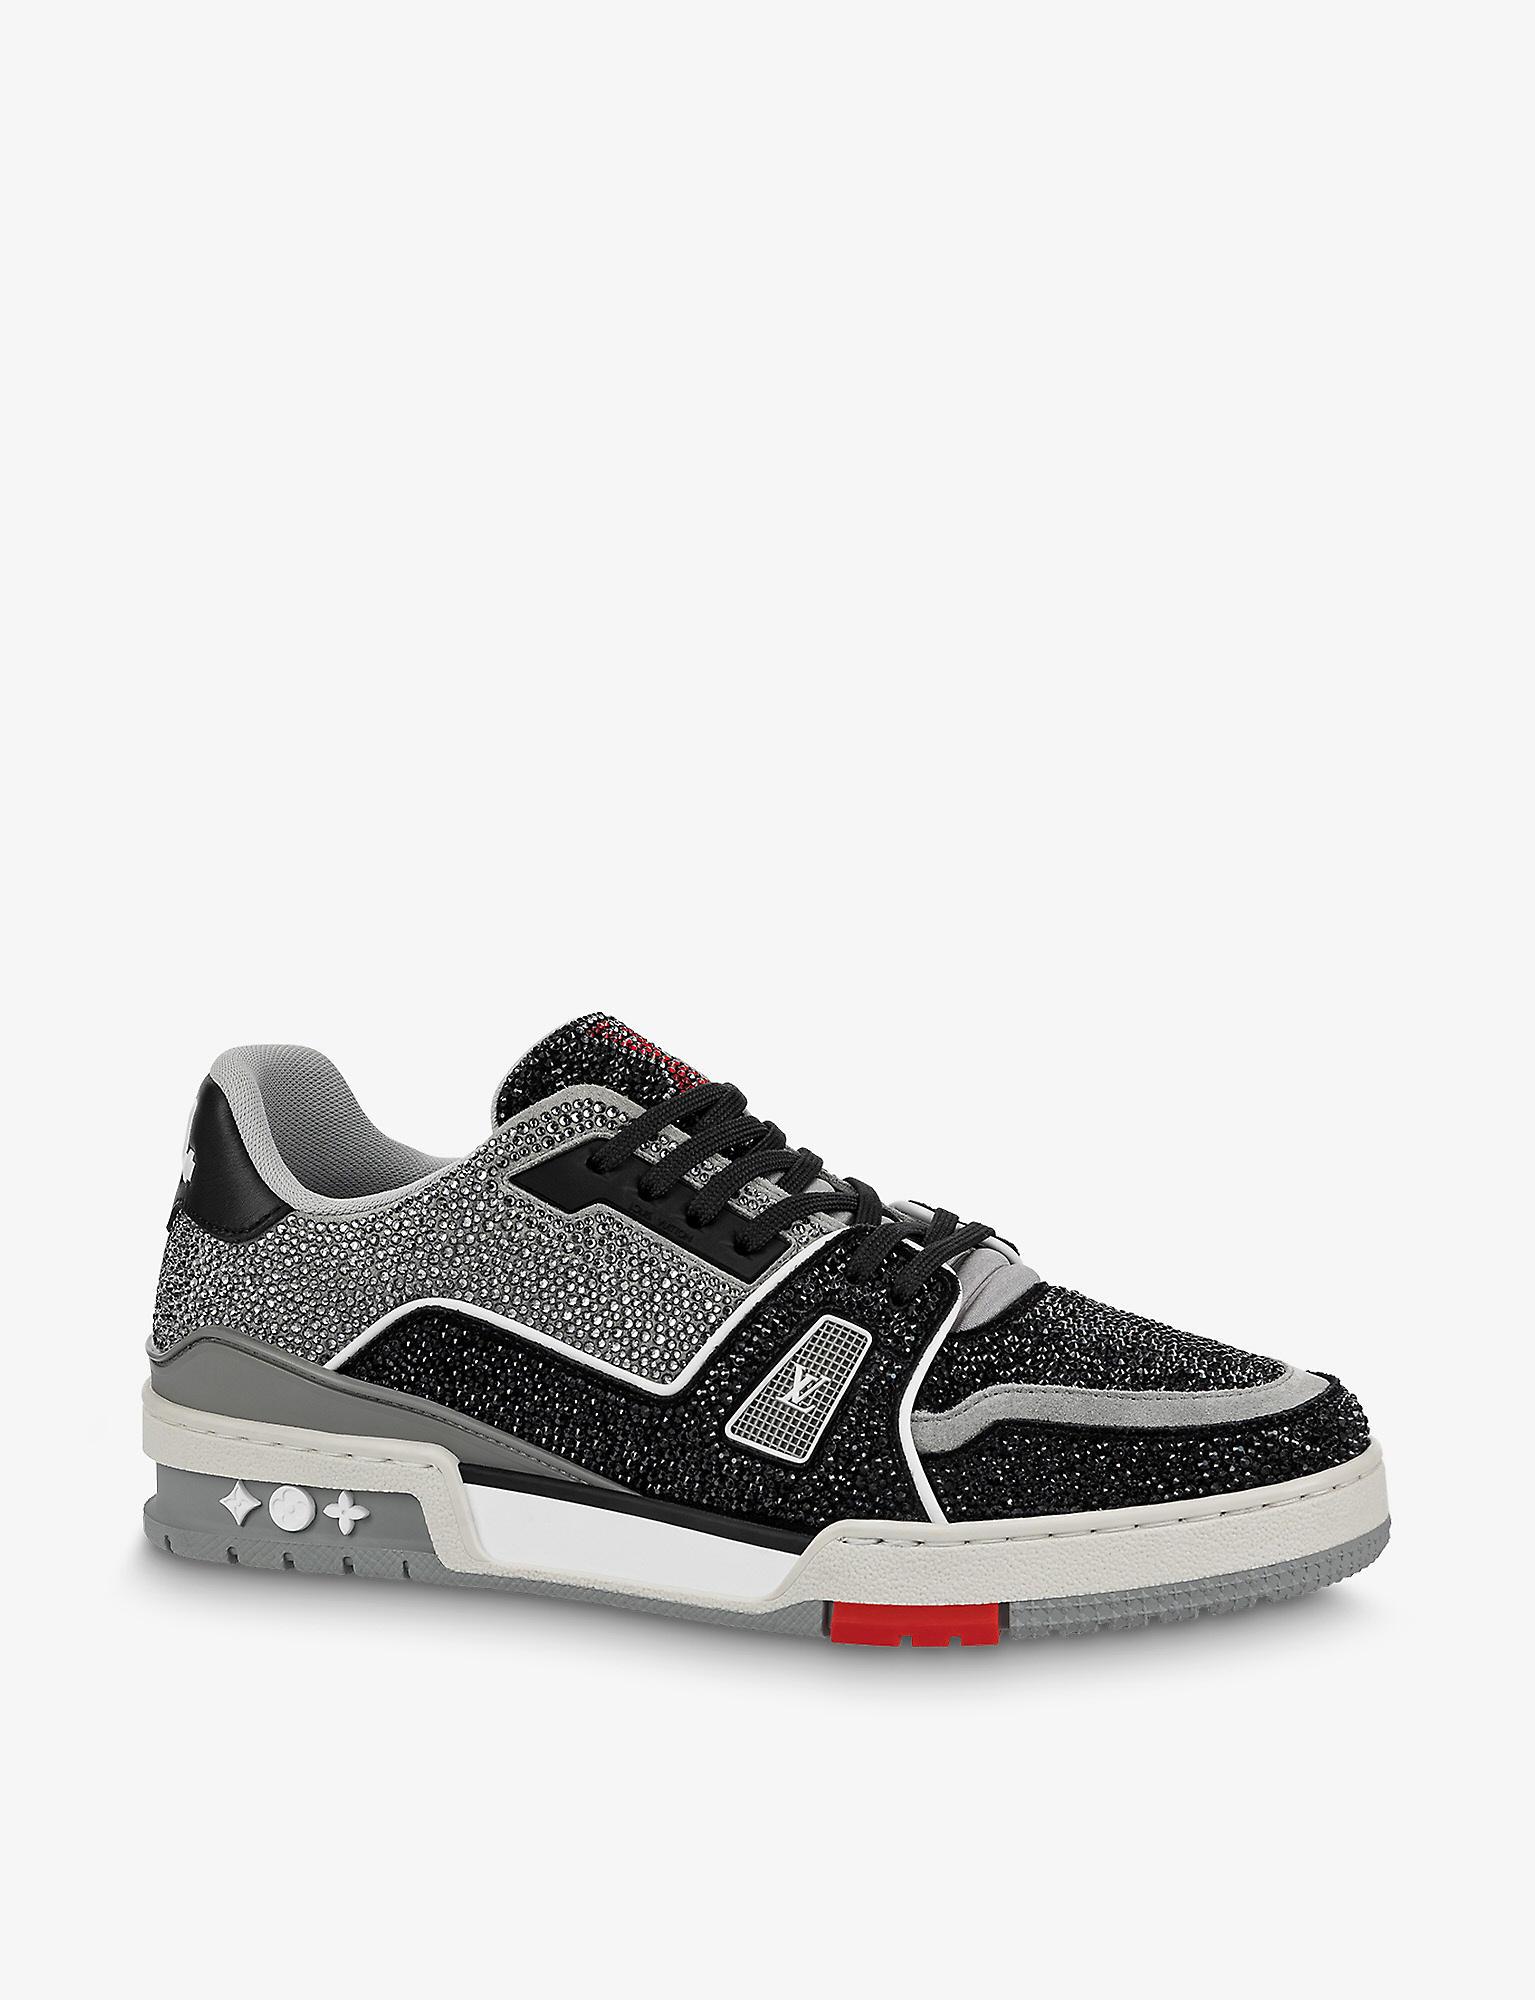 louis vuitton - lv trainer leather low trainers